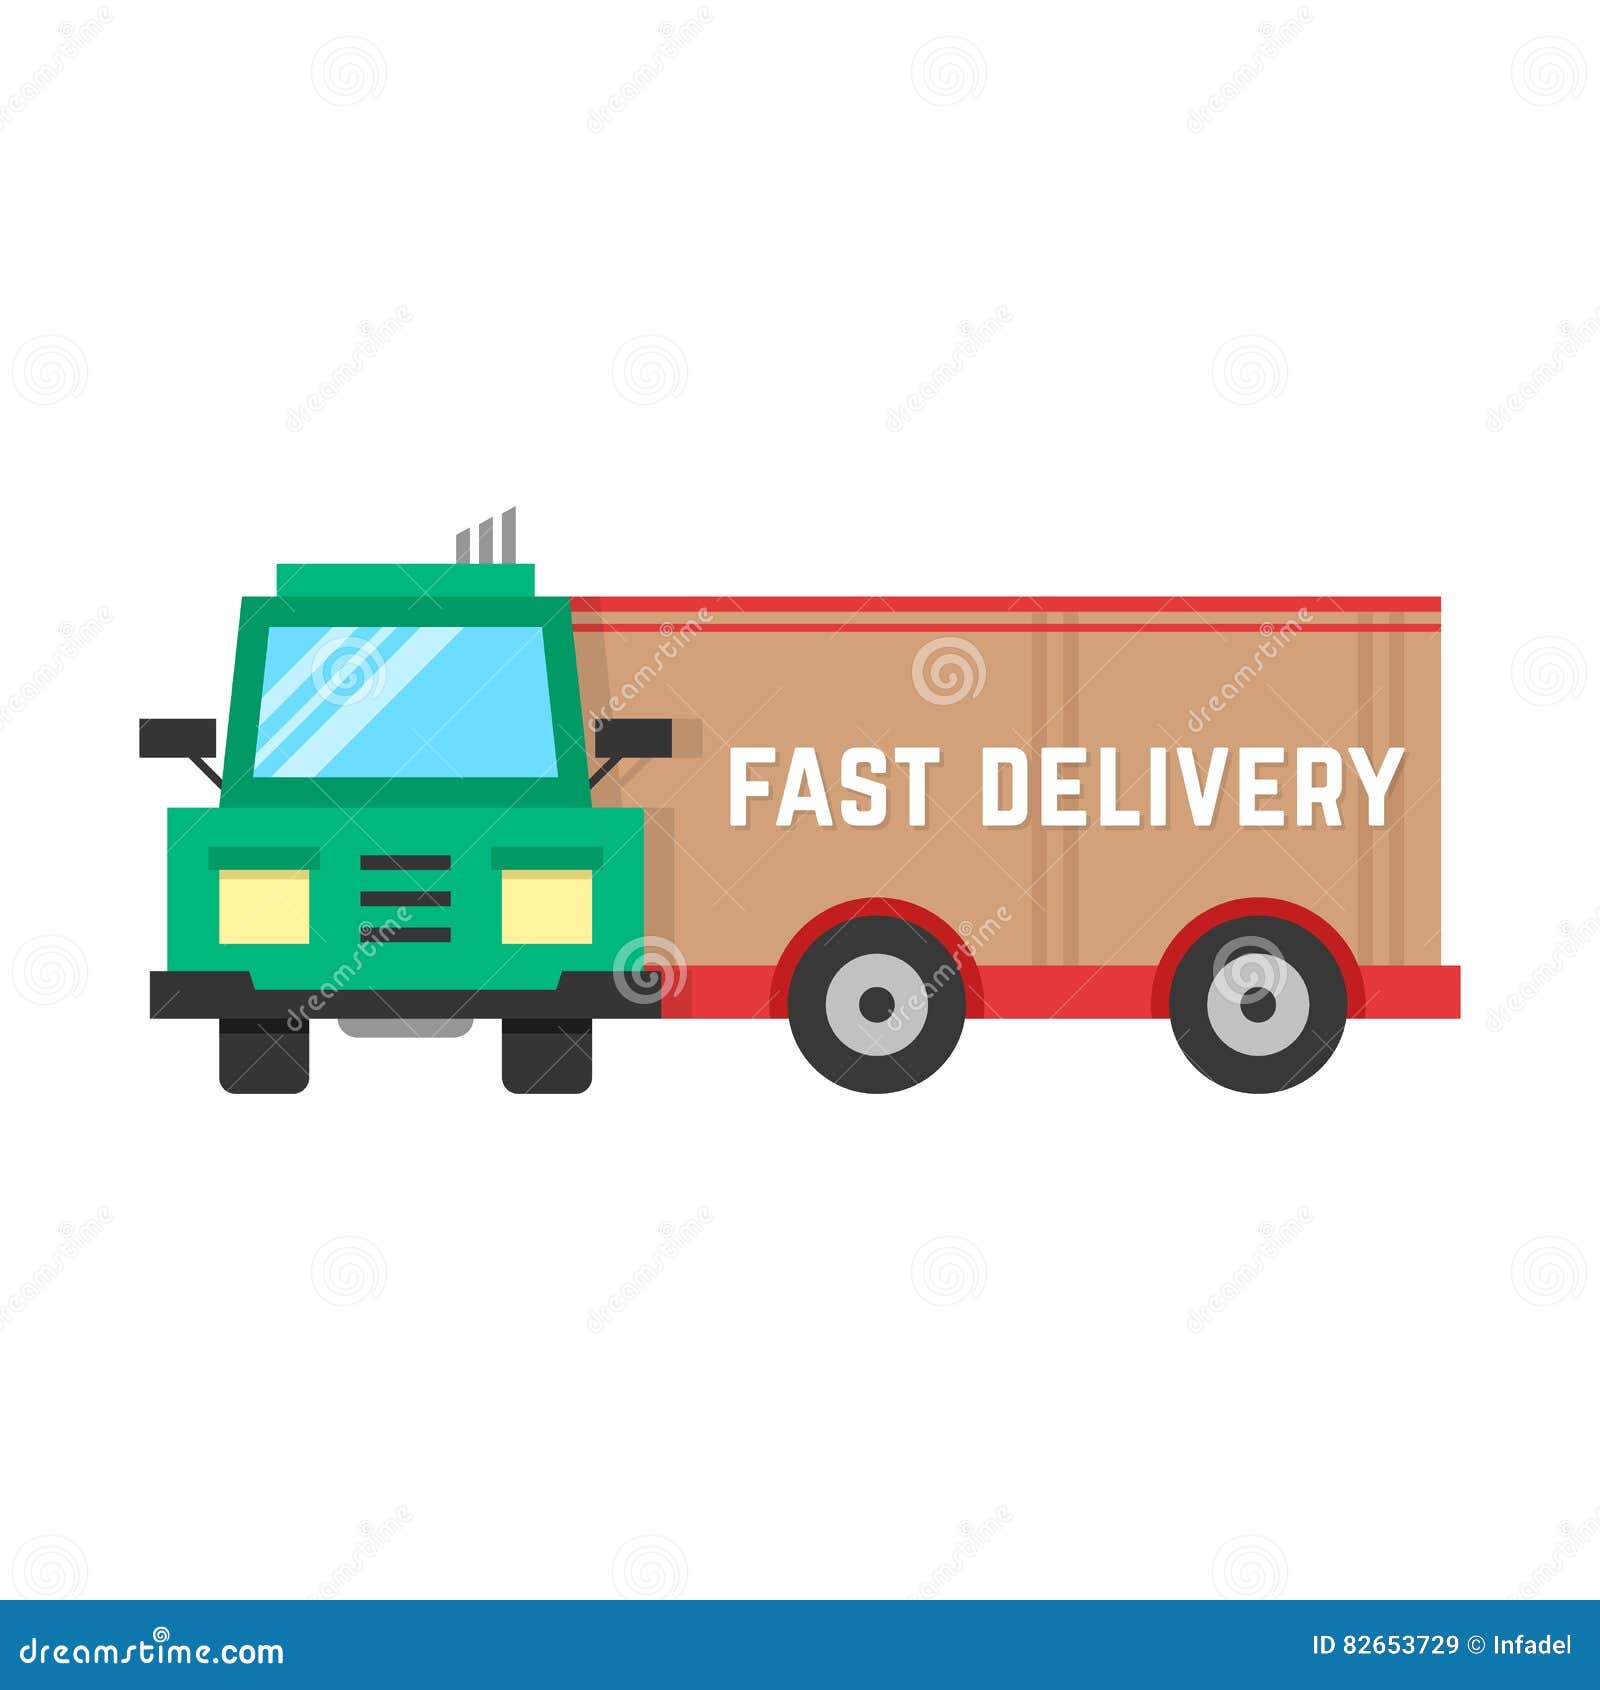 Fast Delivery through Big Truck Stock Vector - Illustration of ...